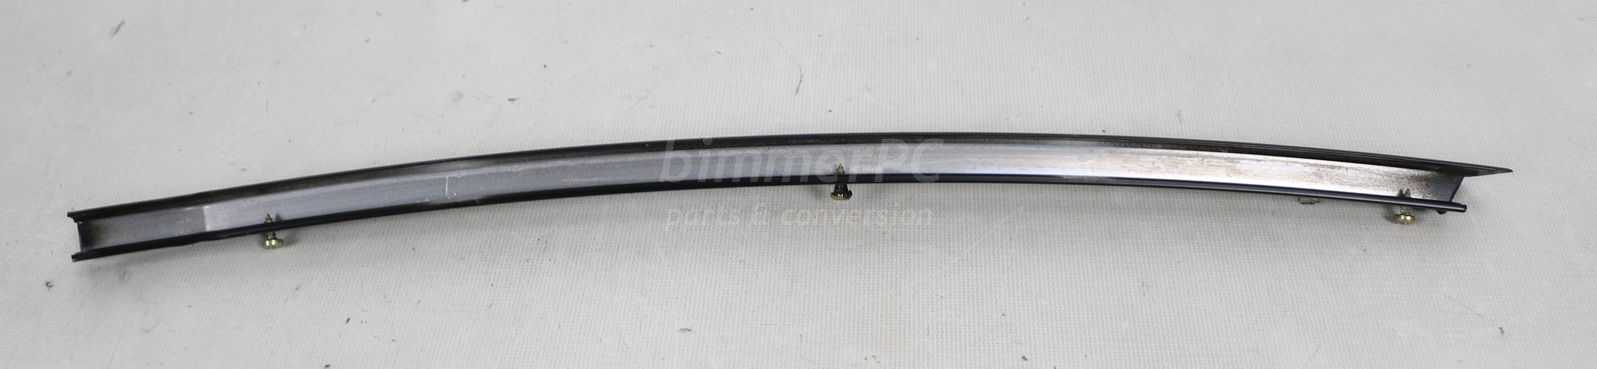 Picture of BMW 51341934296 Rear Right Door Side Quarter Main Glass Divider Exterior Trim Moulding Insert E34 for sale